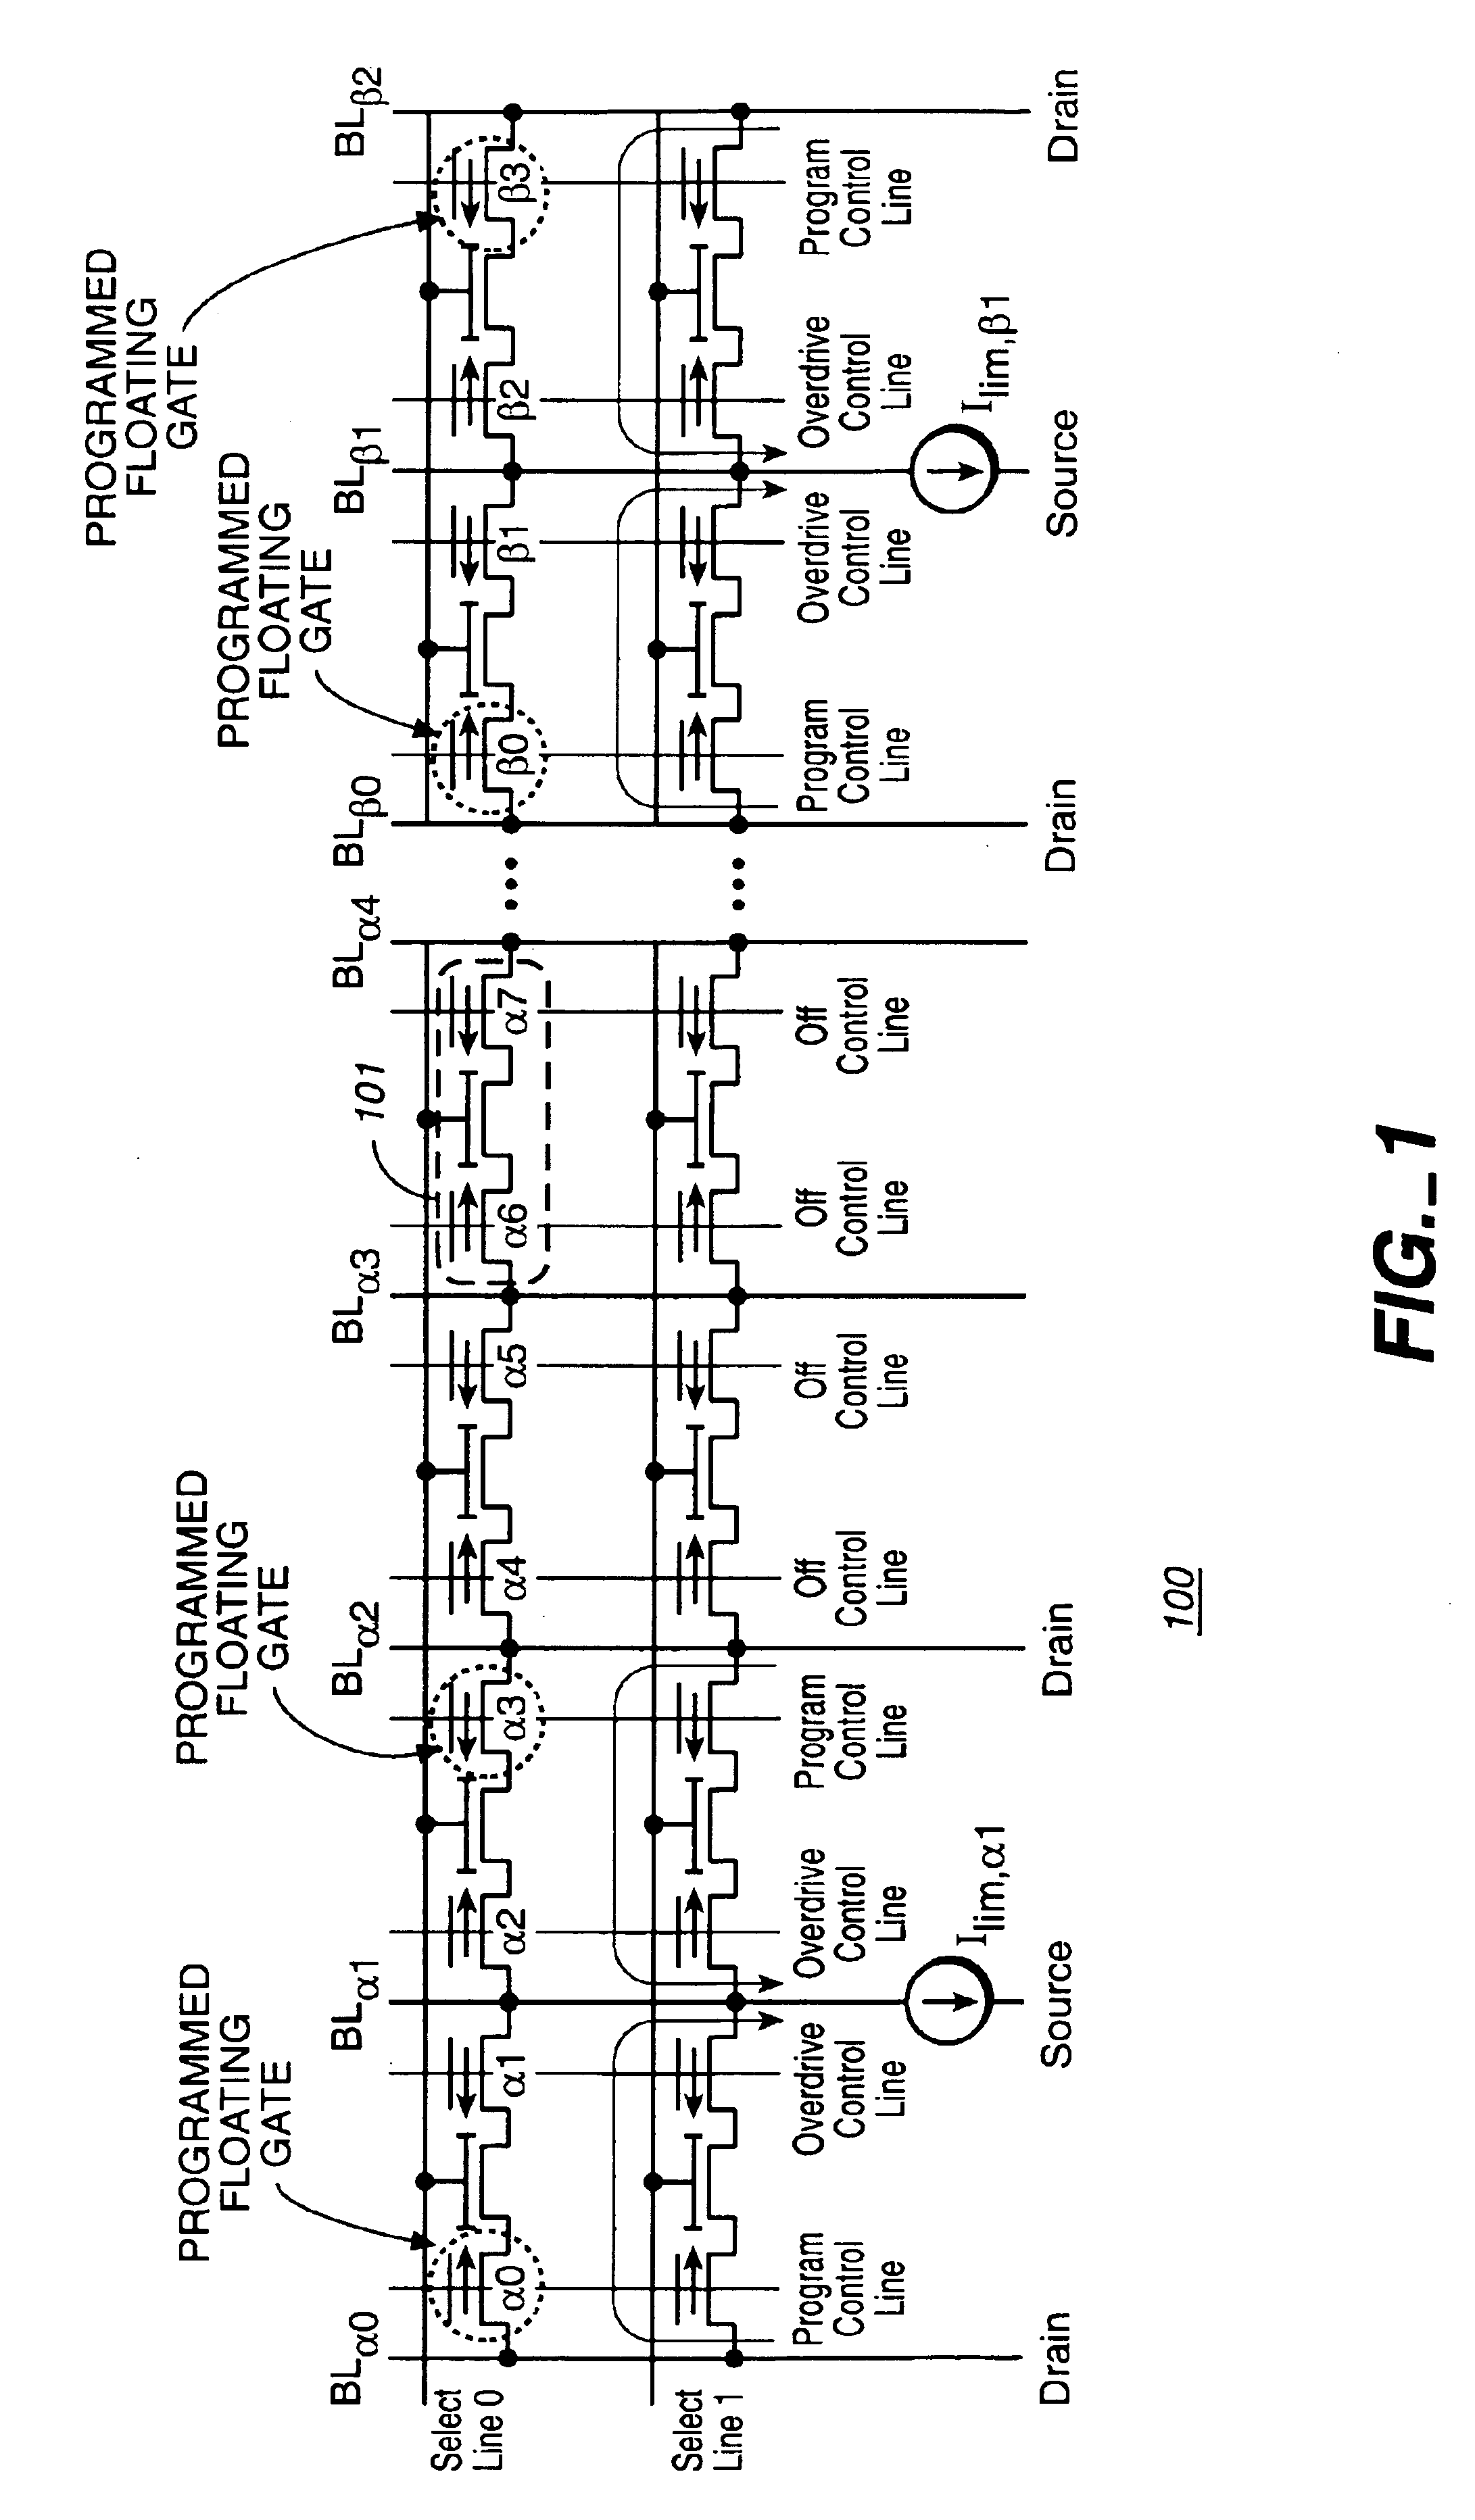 System and method for programming cells in non-volatile integrated memory devices